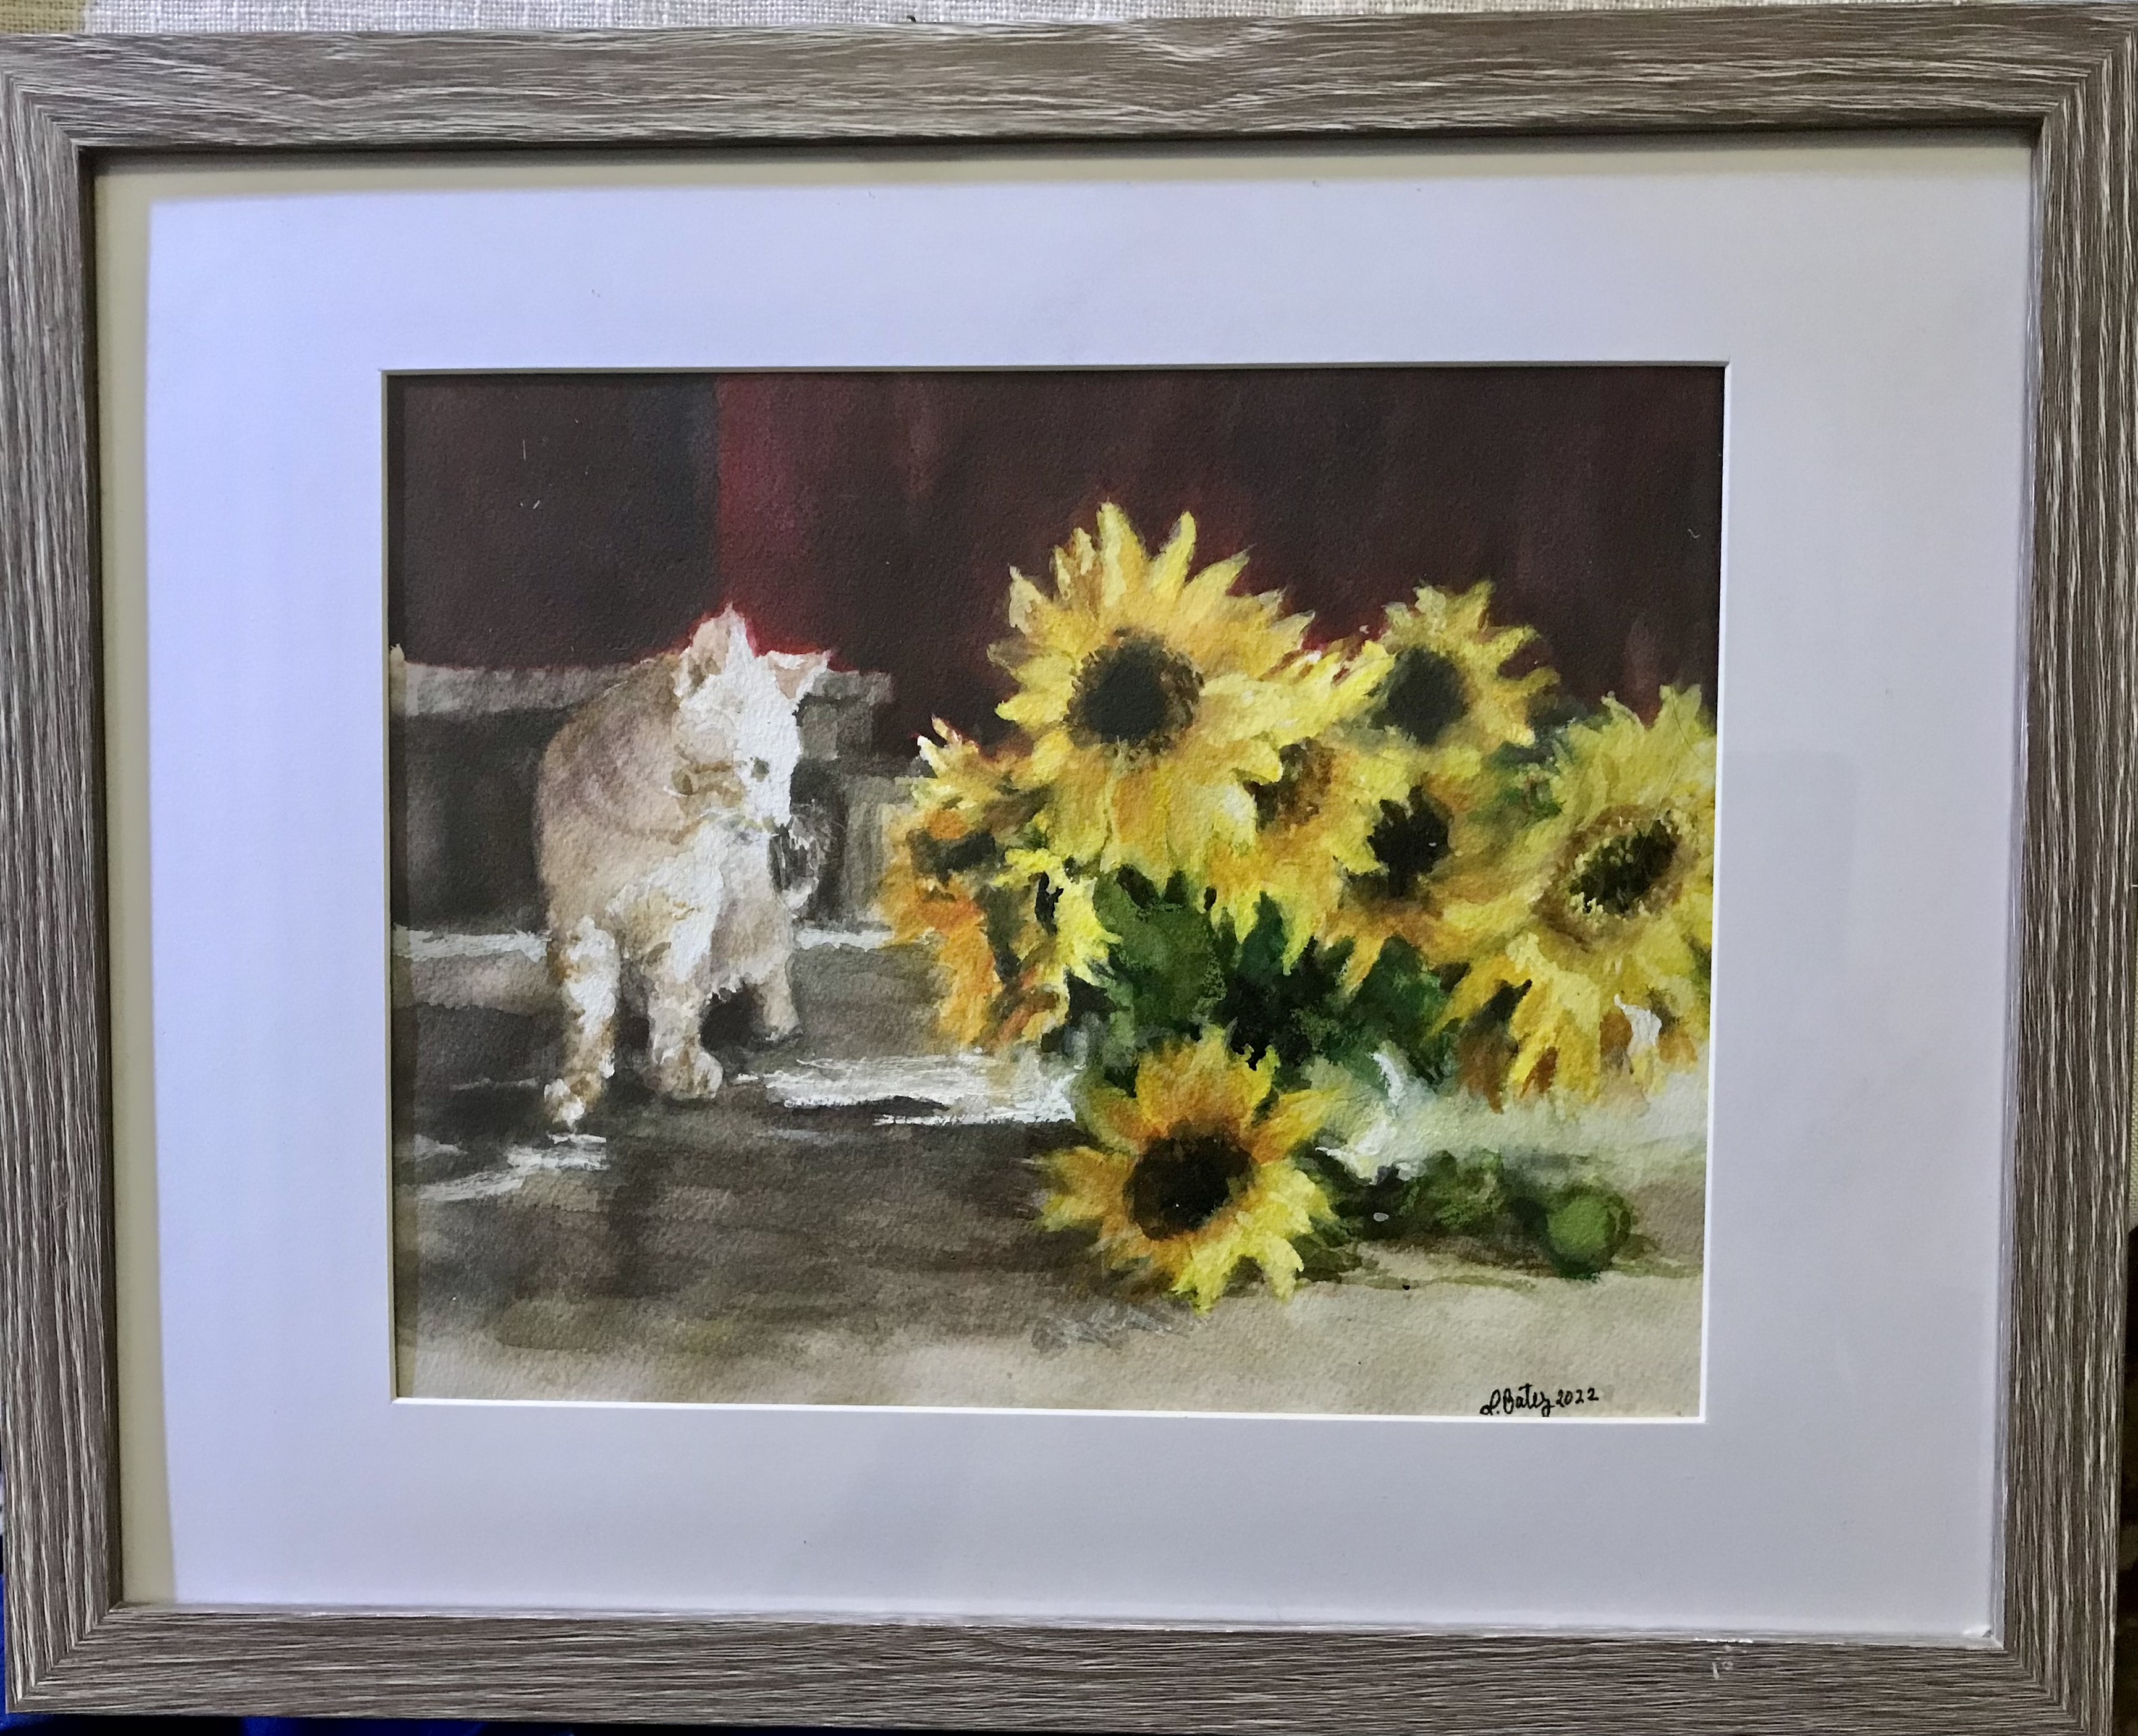 Original watercolor painting by featured artist, Linda White Batey.